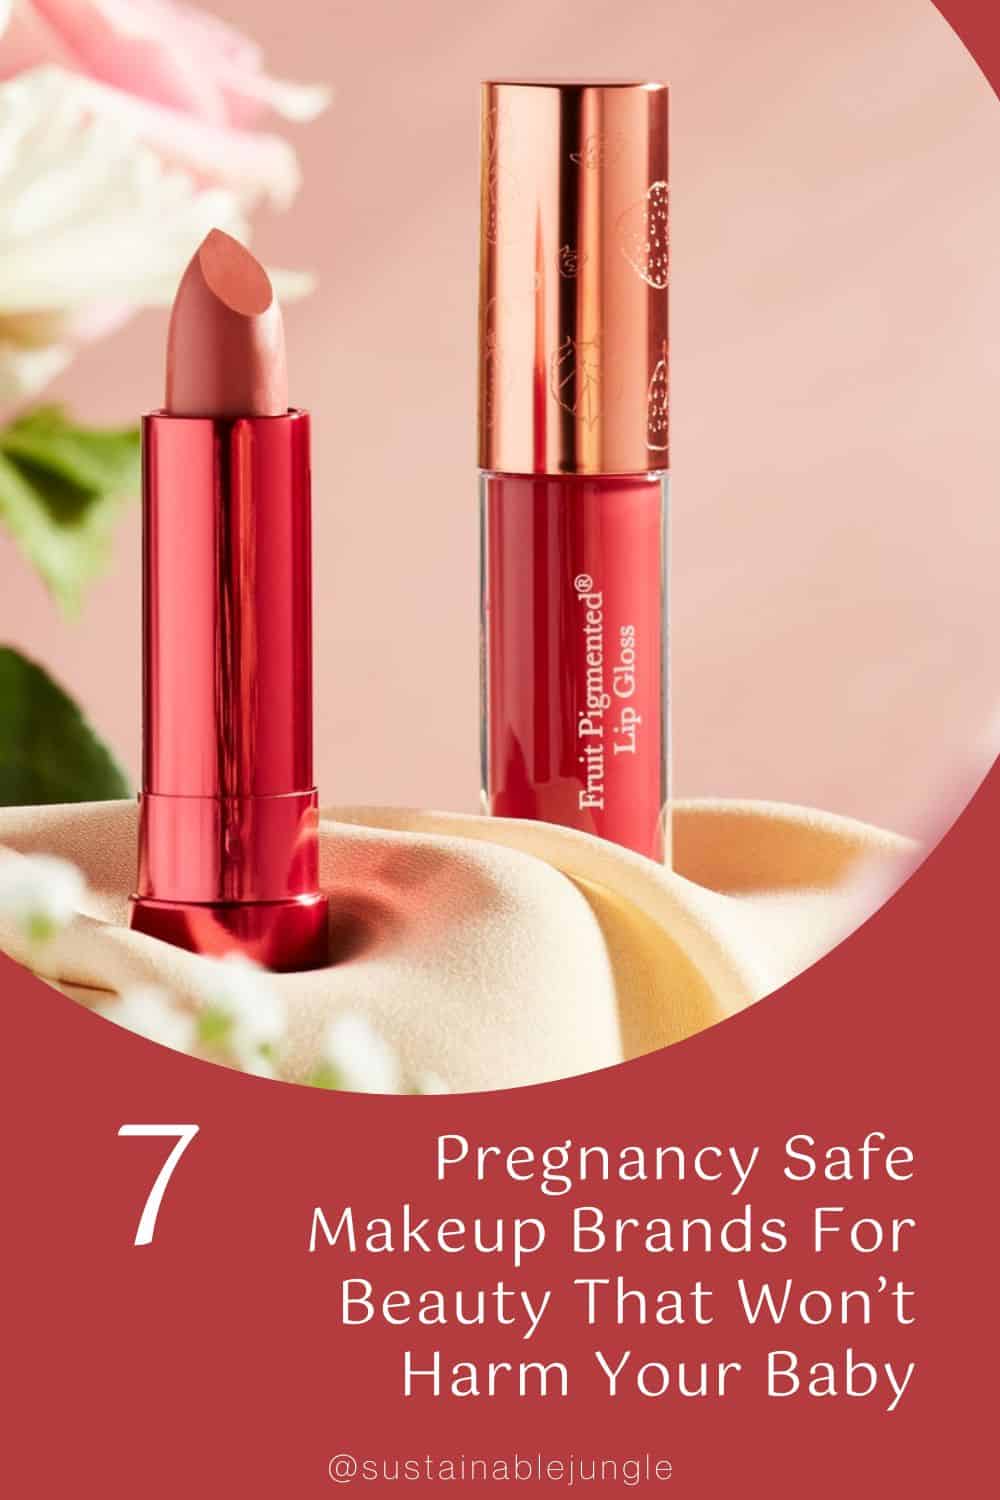 7 Pregnancy Safe Makeup Brands For Beauty That Won’t Harm Your Baby Image by 100% Pure #pregnancysafemakeup #pregnancysafemakeupbrands #makeupbrandssafeforpregnancy #bestmakeupforpregnancy #beautyproductssafeforpregnancy #safepregnancybeautyproducts #sustainablejungle